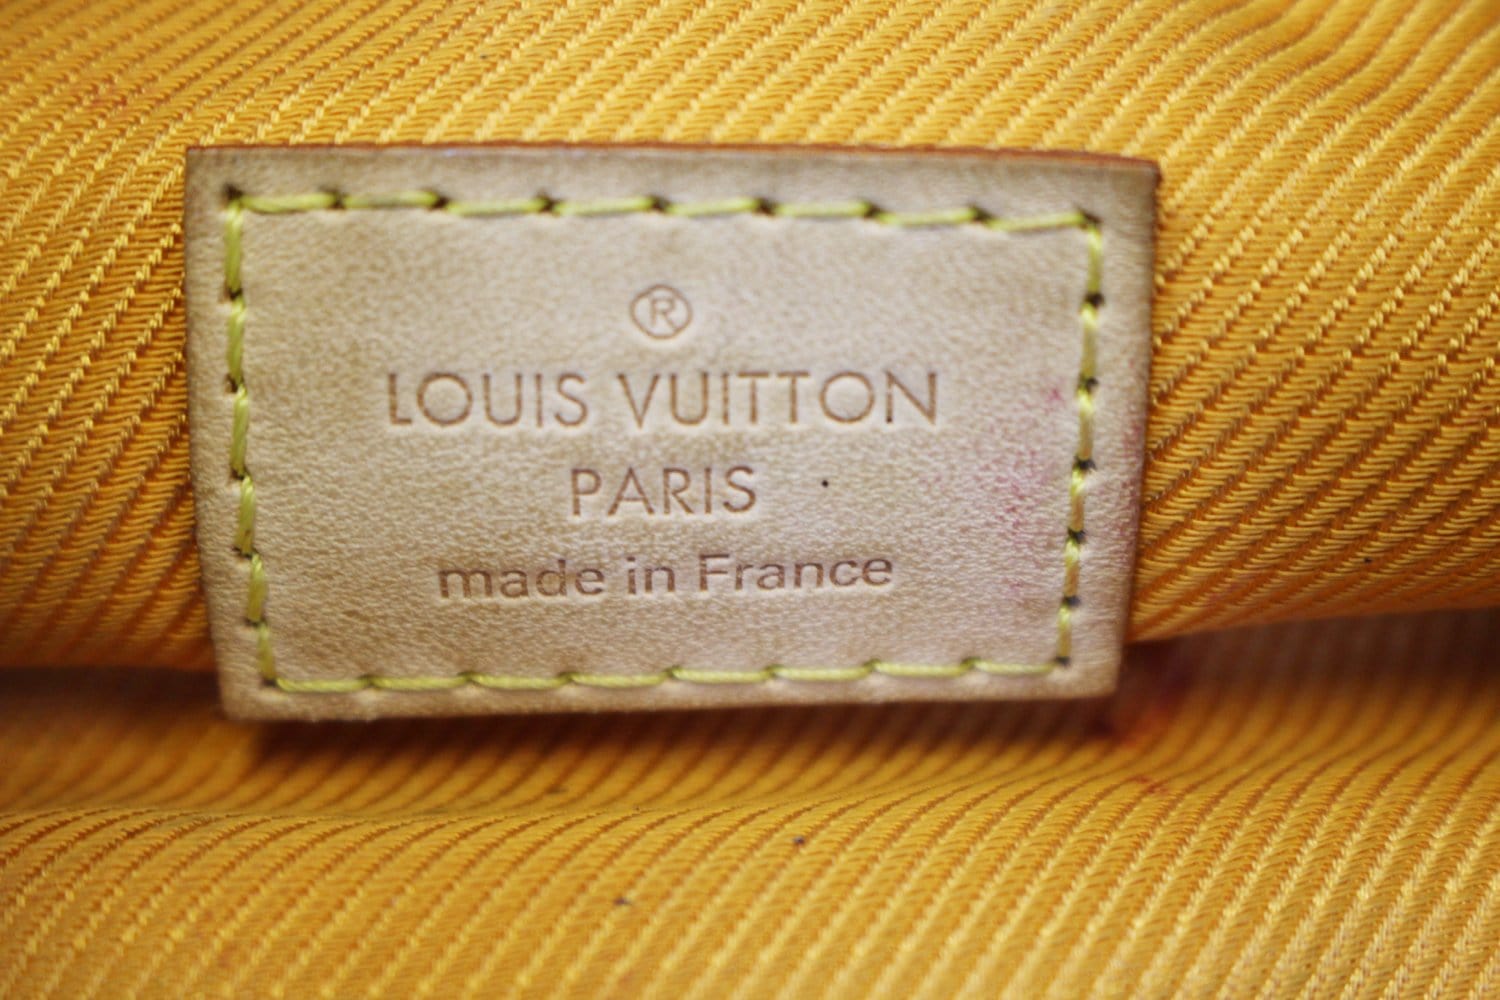 Louis Vuitton - Authenticated Limelight Clutch Bag - Leather Brown Plain for Women, Very Good Condition